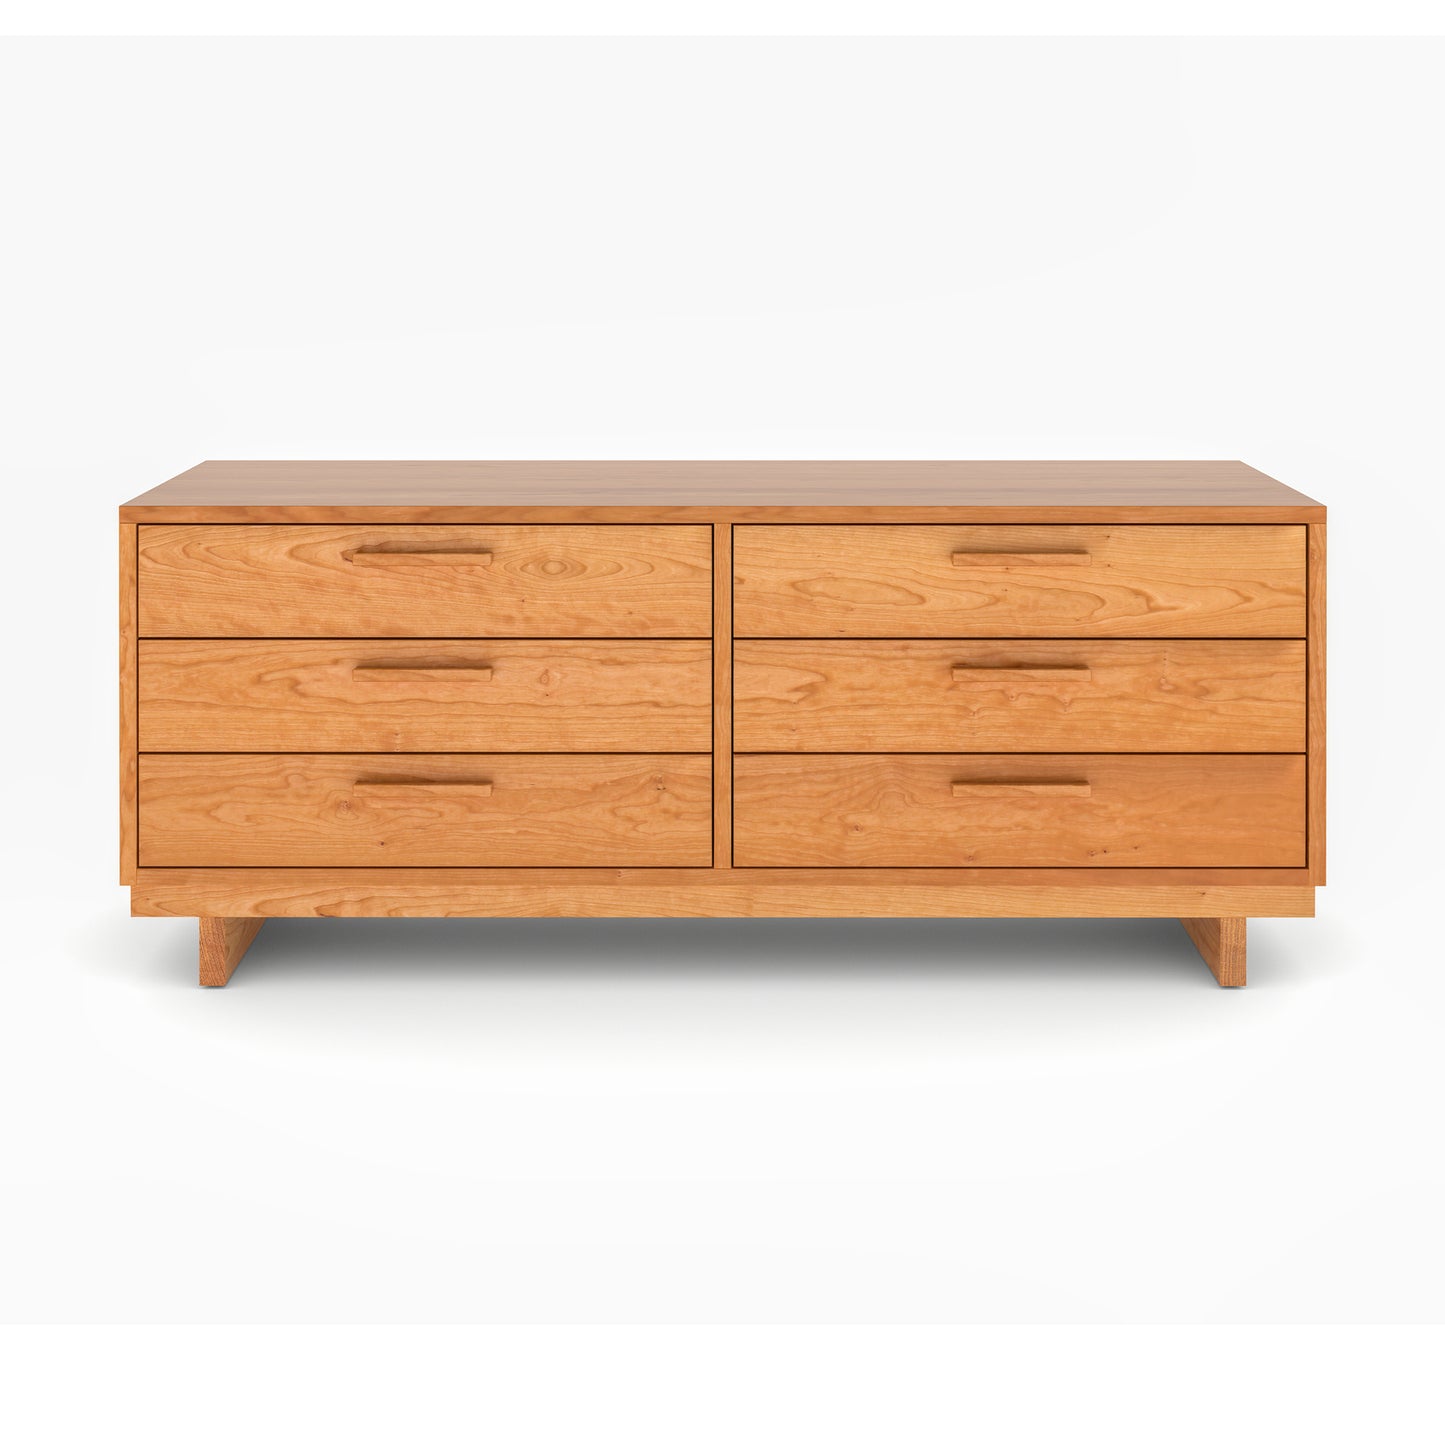 A Loft Double Dresser from Vermont Furniture Designs, featuring drawers on a white background.